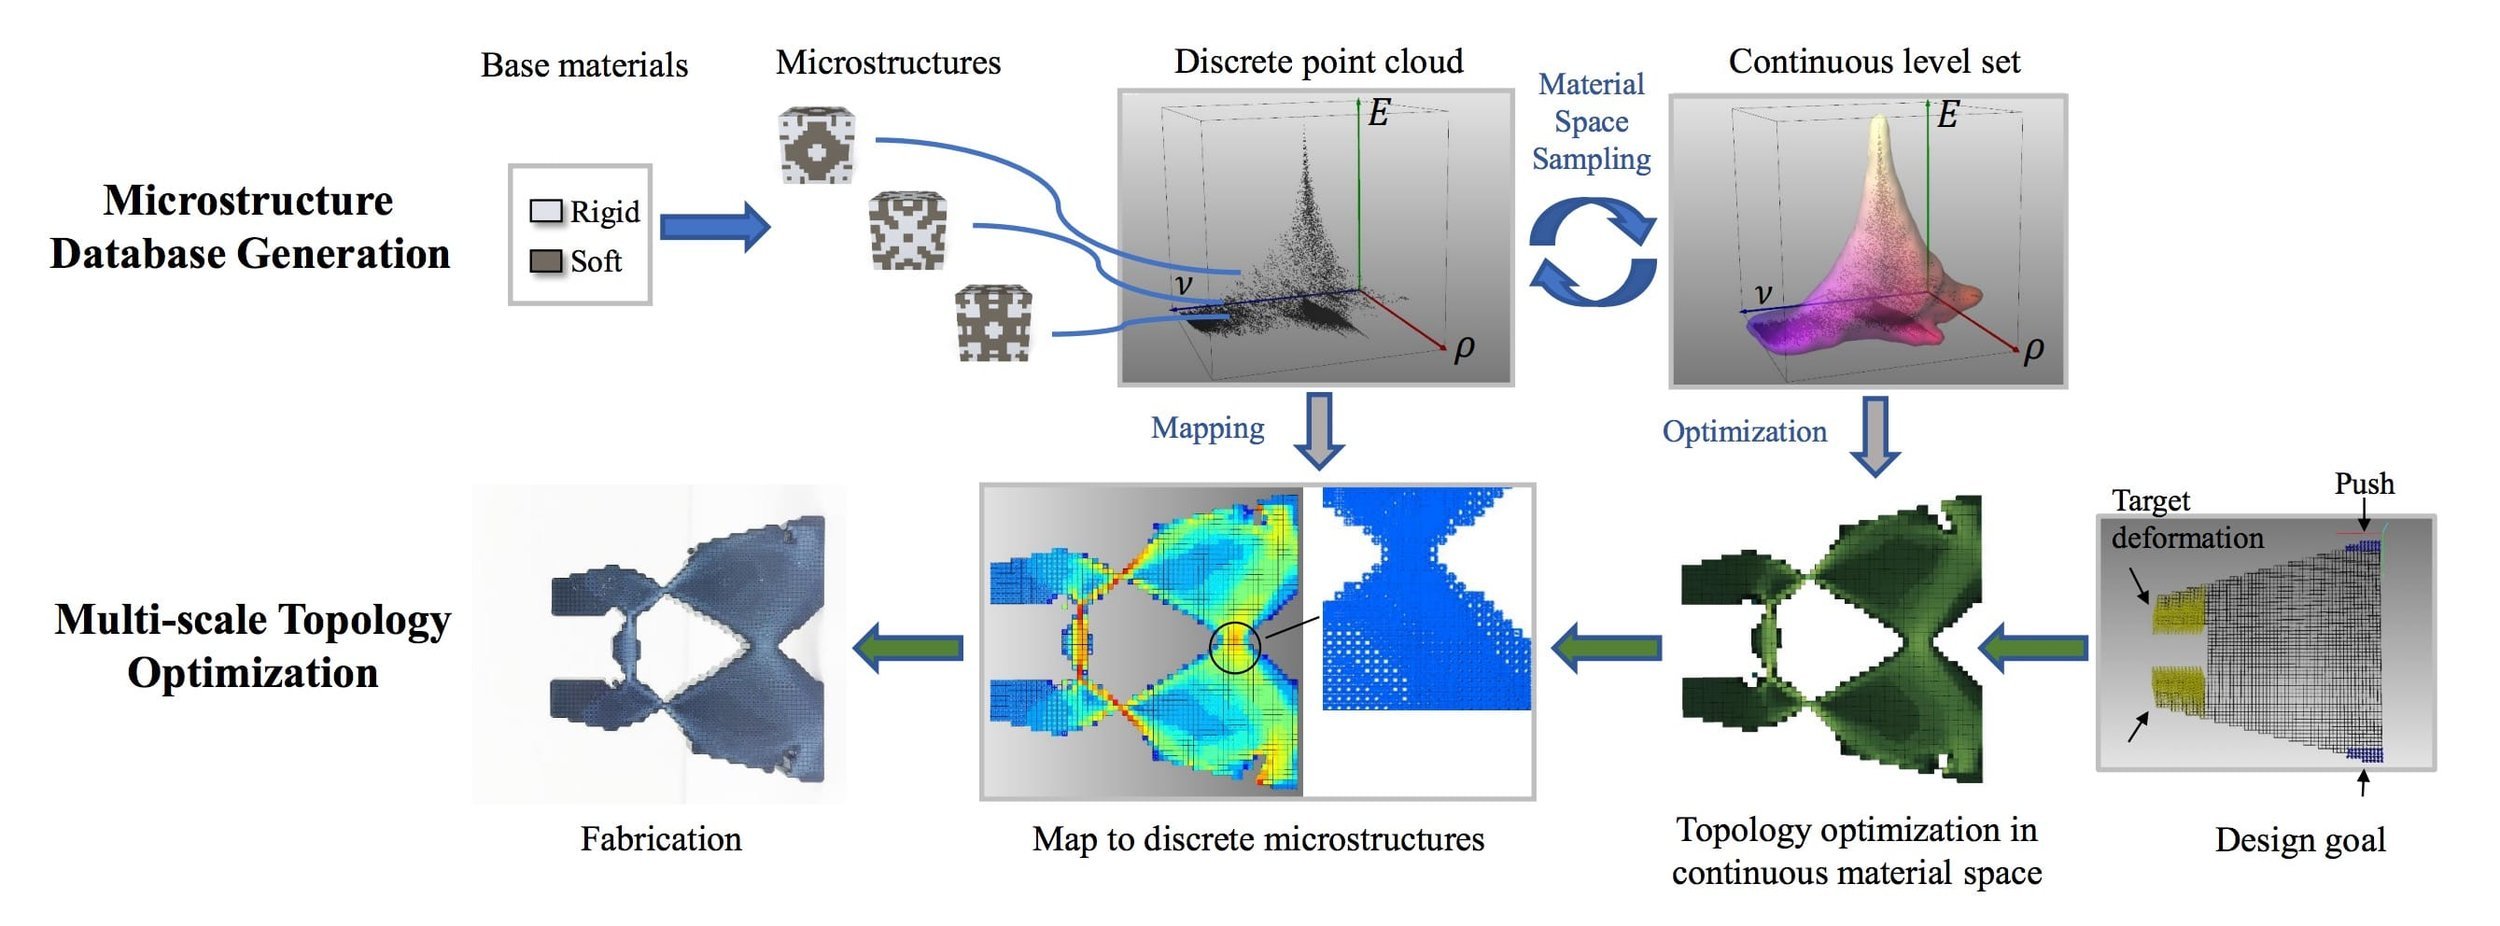  The full MIT microstructure 3D printing process for creating highly complex objects 